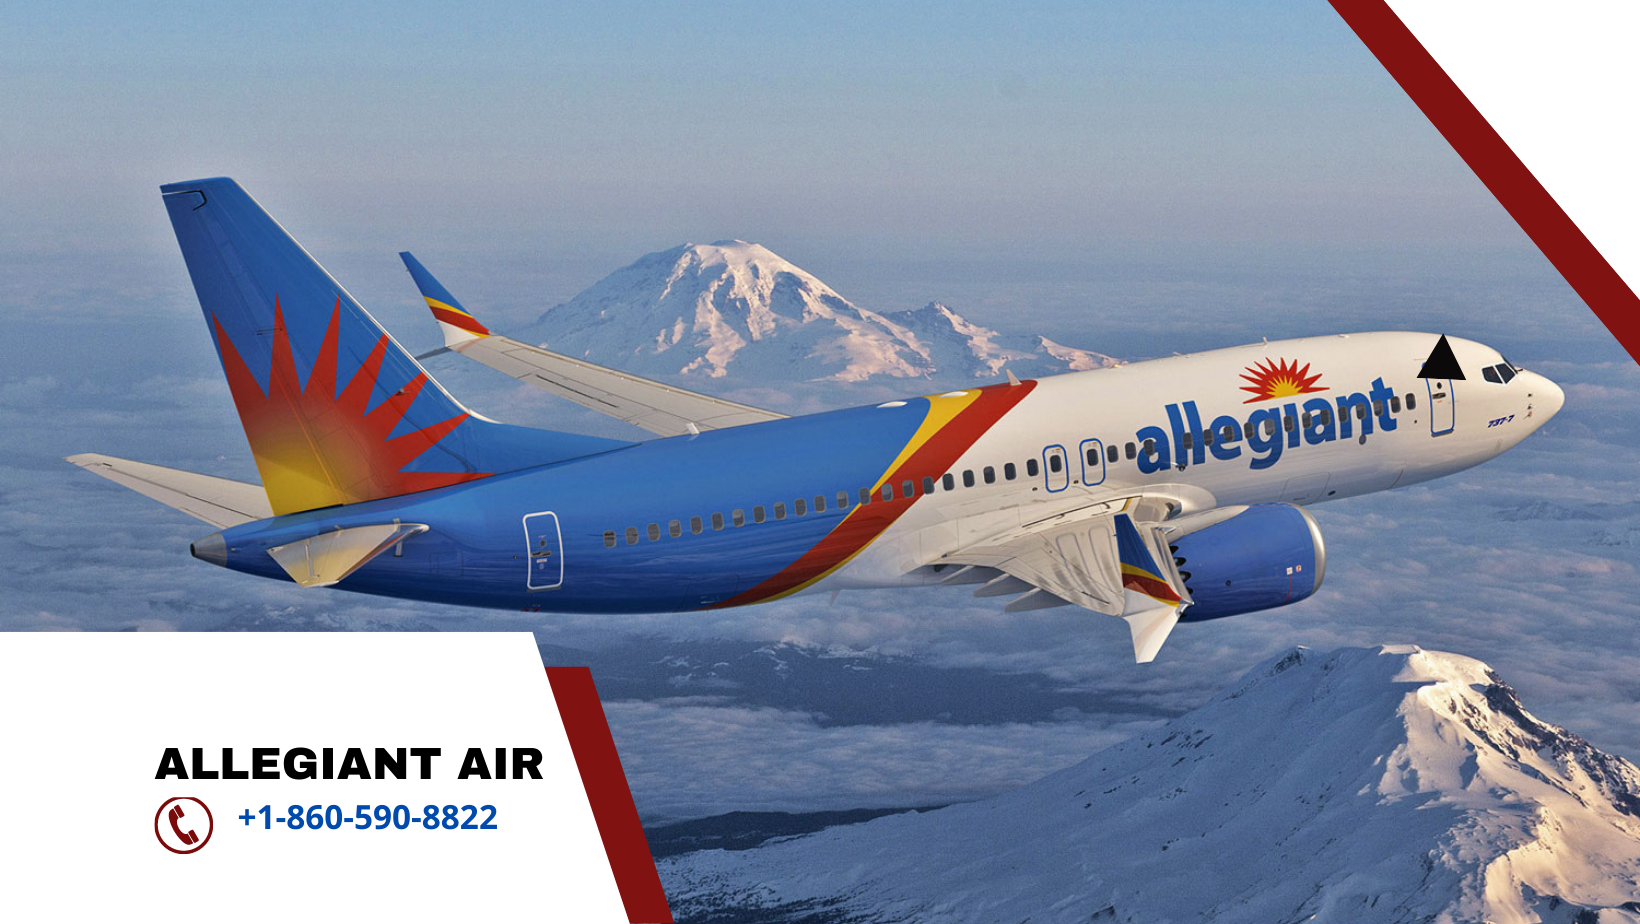 How do I Talk to a Person at Allegiant Air?